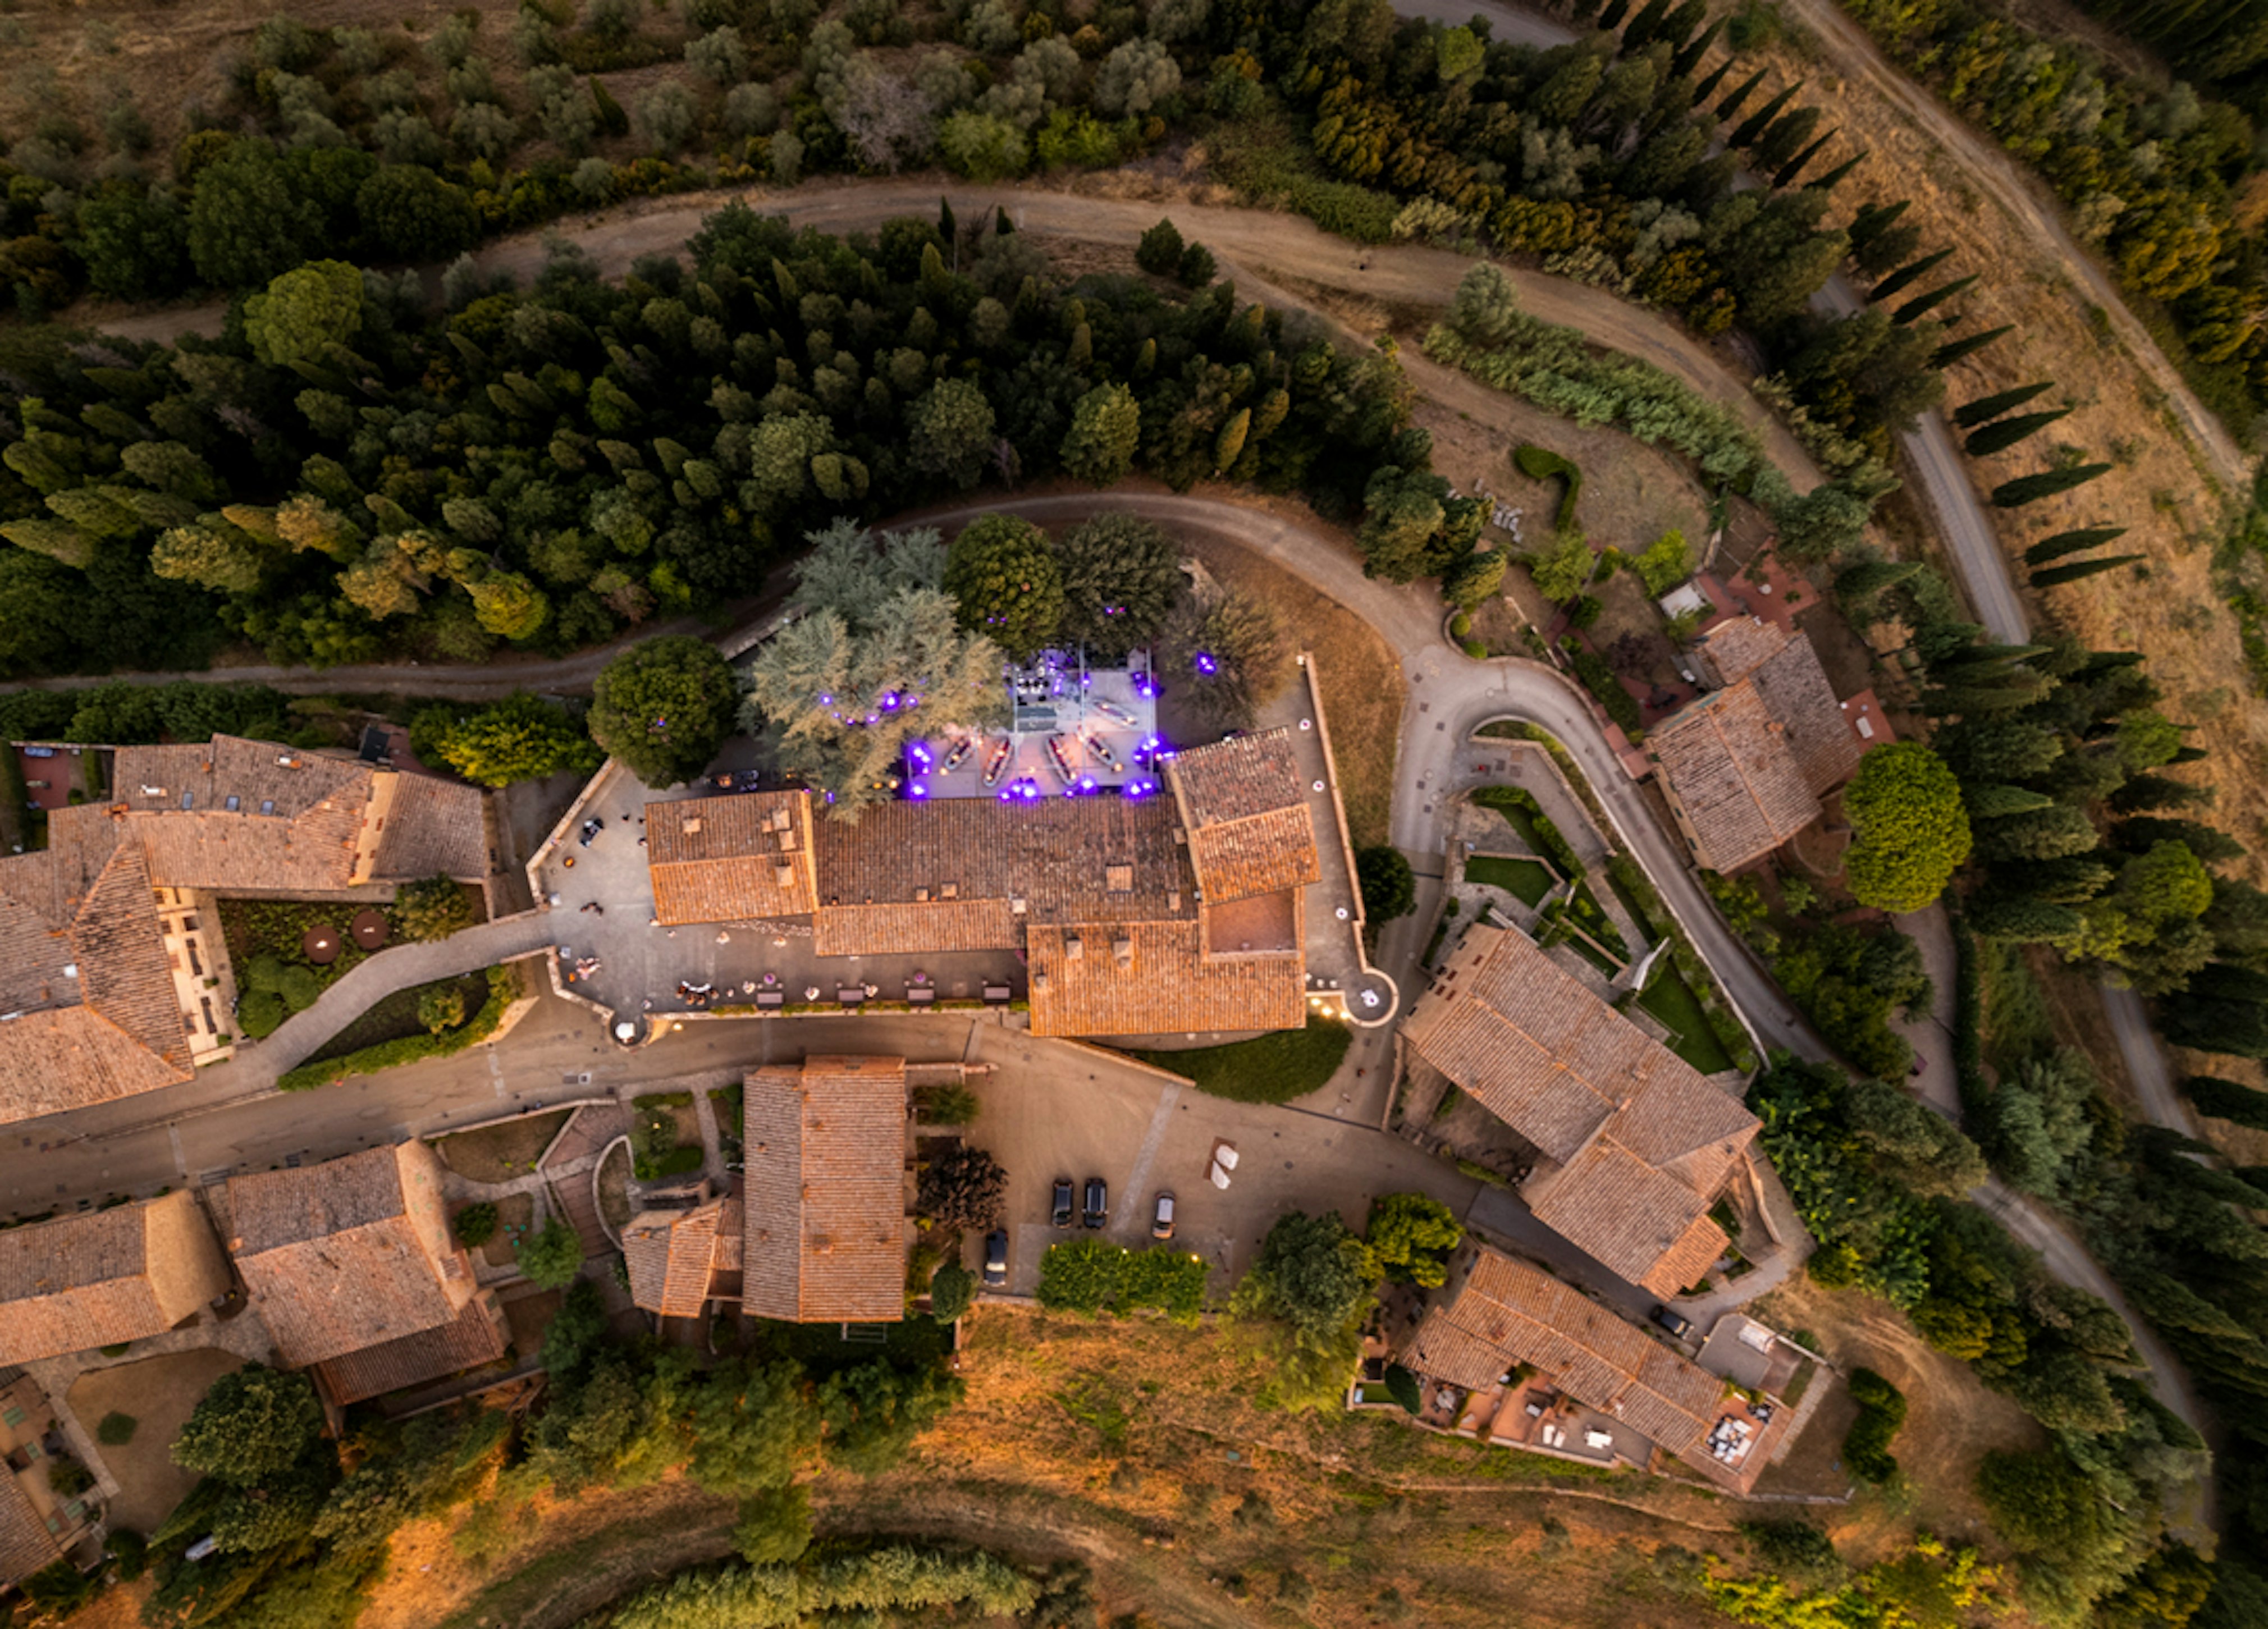 Weddings and intimate events in the Tuscan hills